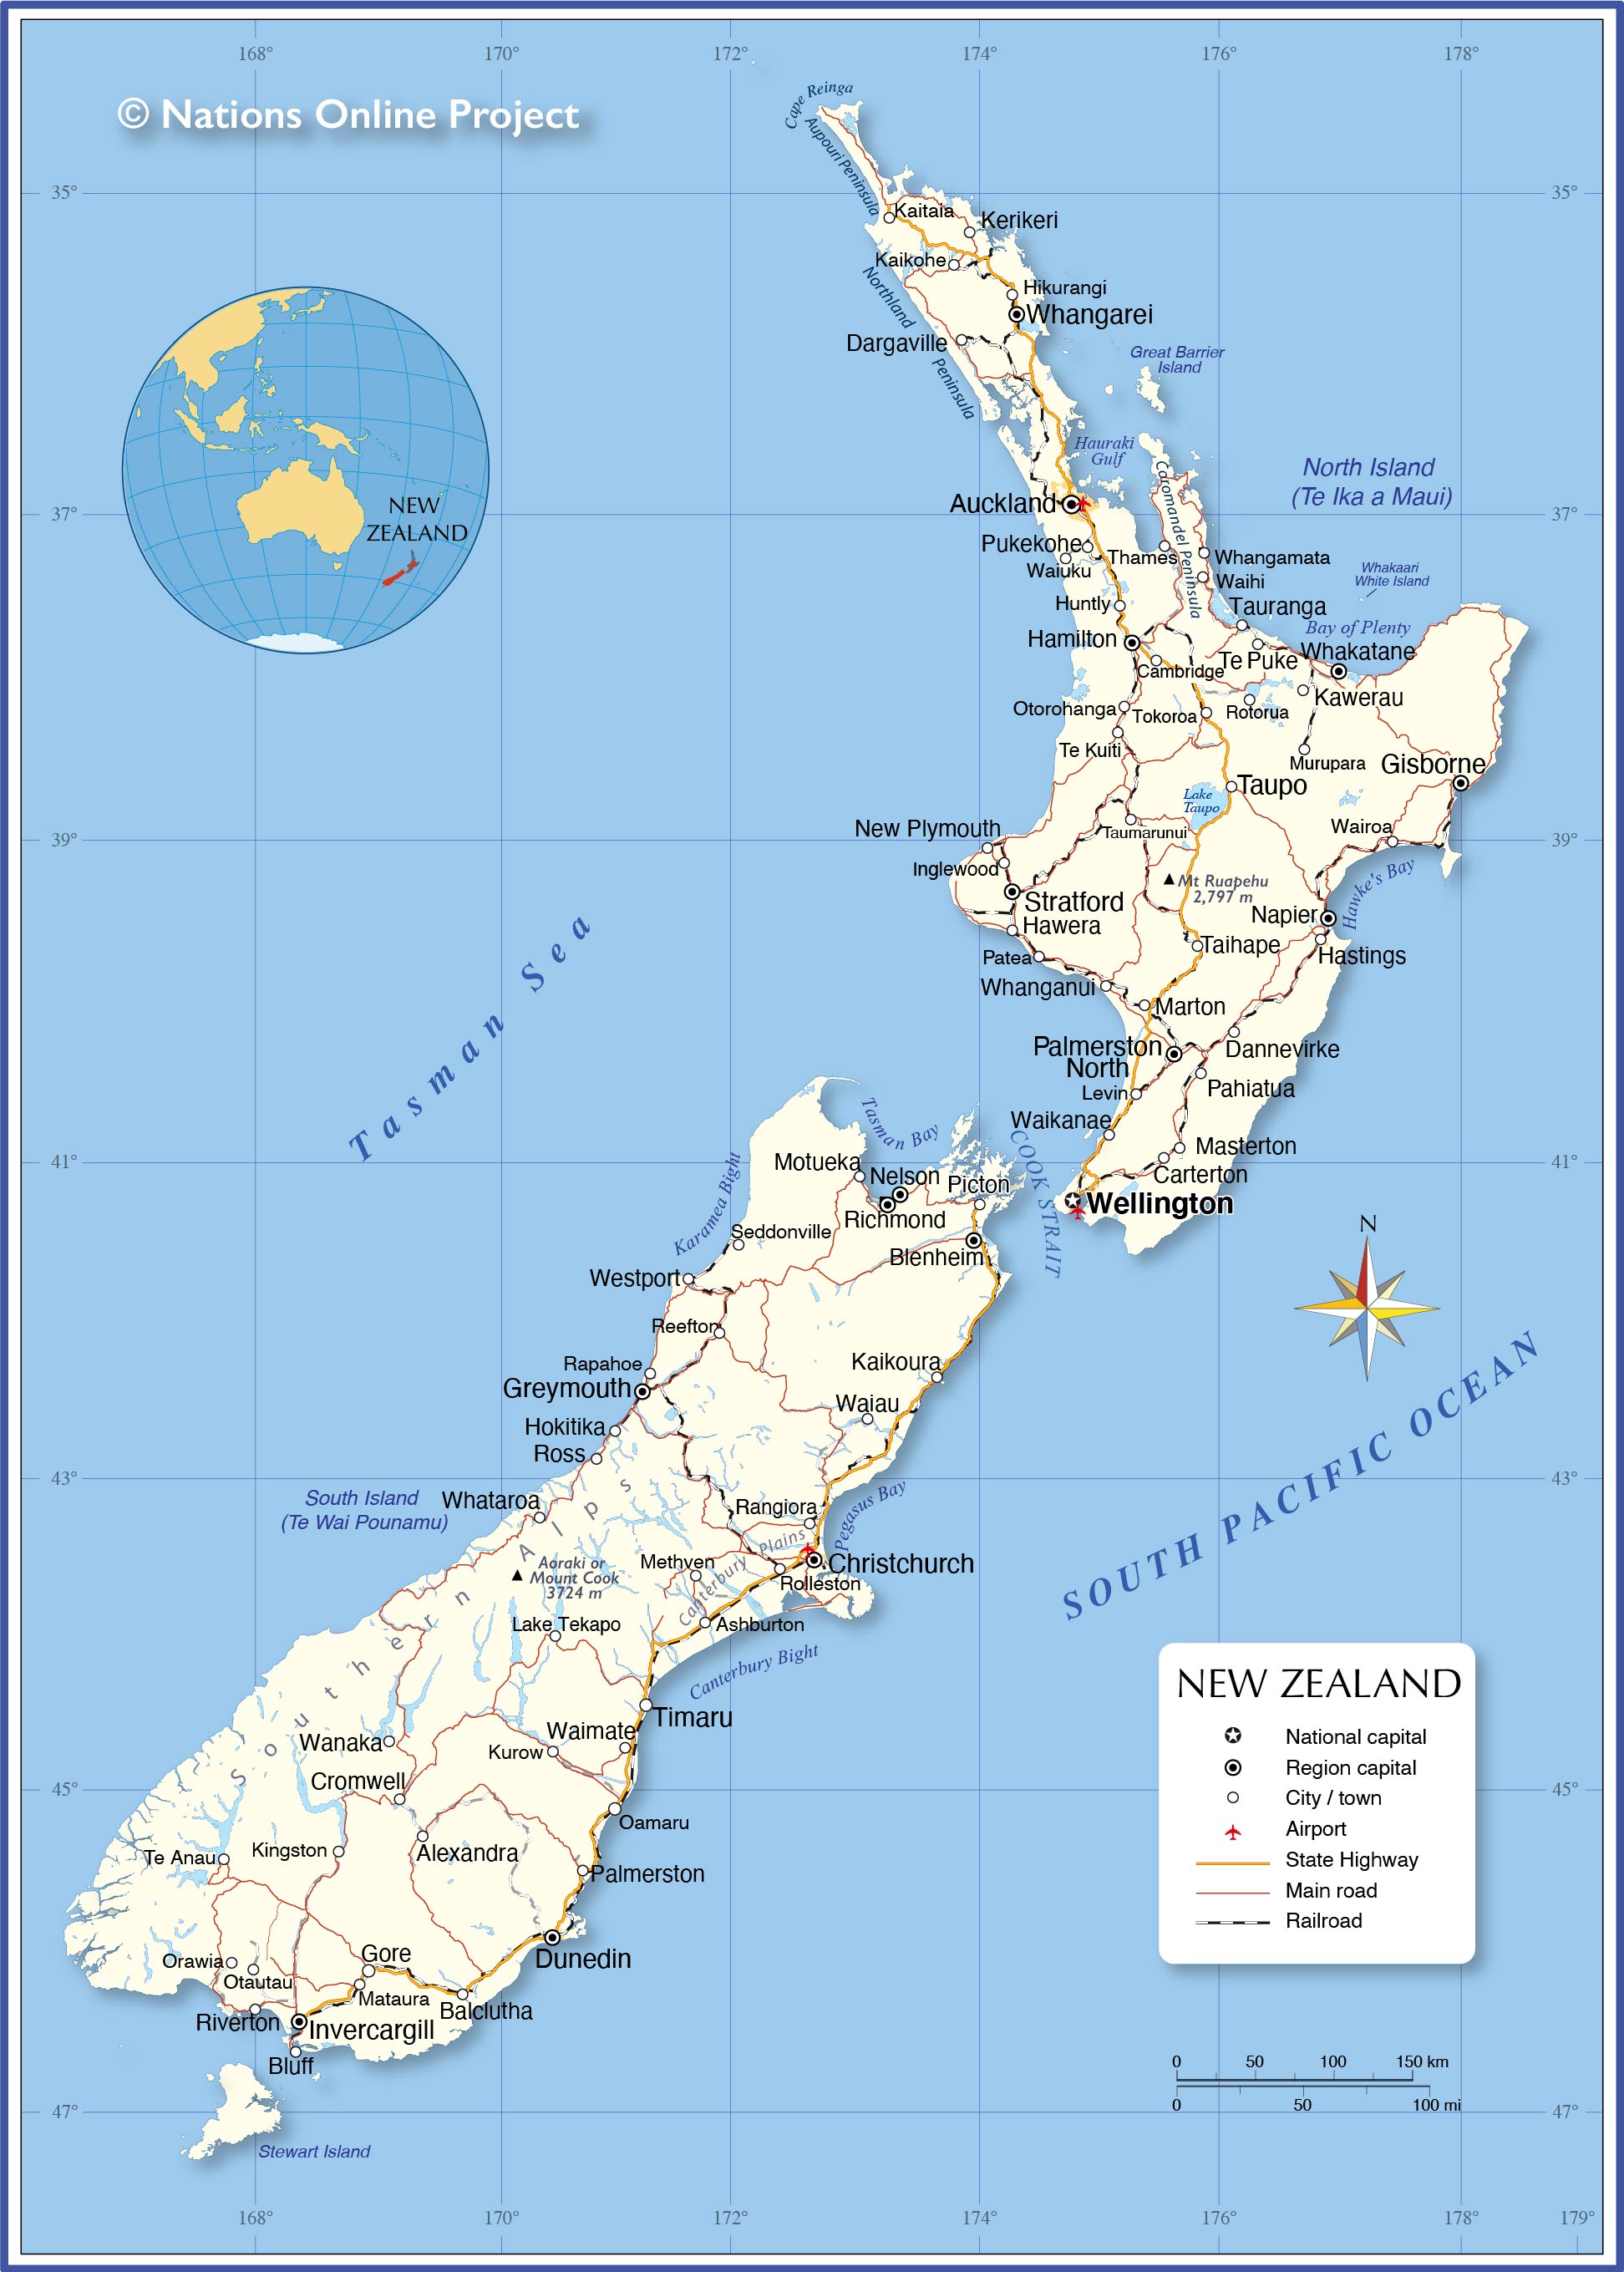 The Political Map of New Zealand Adapted from “Map of New Zealand, Australia/Oceania," Nations Online. 